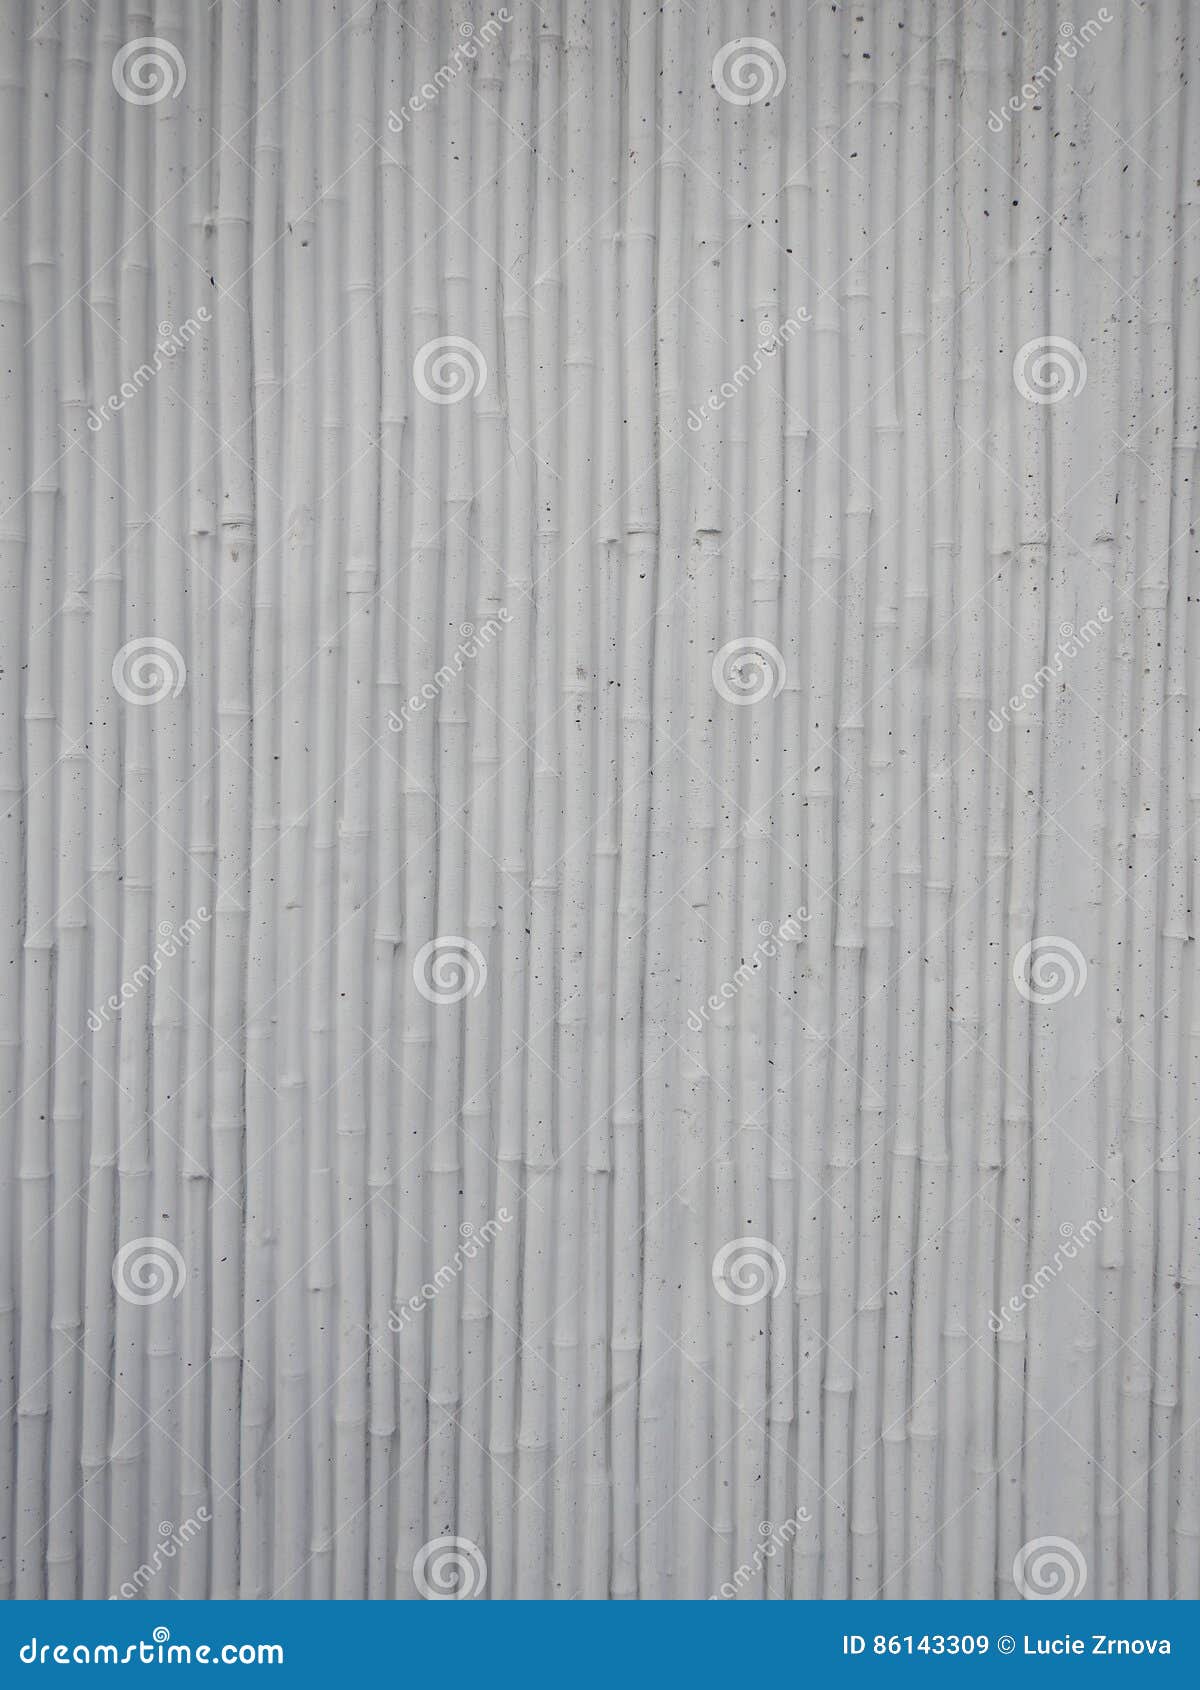 White corrugated plaster wall texture - PatternPictures